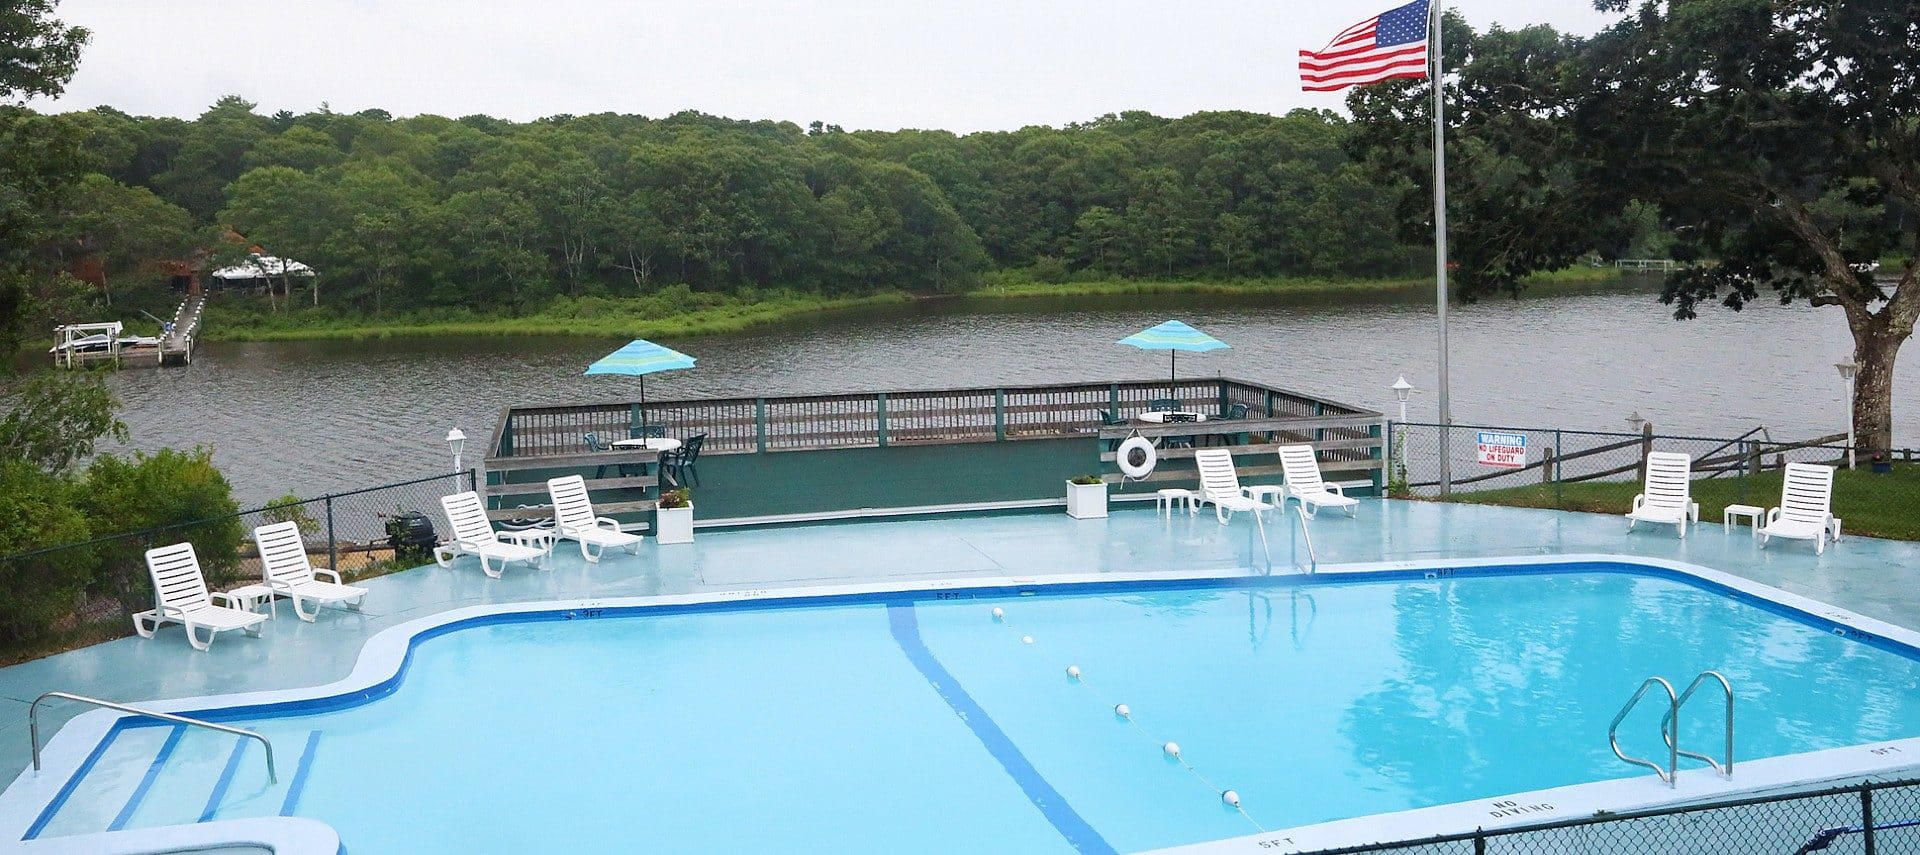 A large swimming pool with white lounging chairs and green deck overlooking a body of water